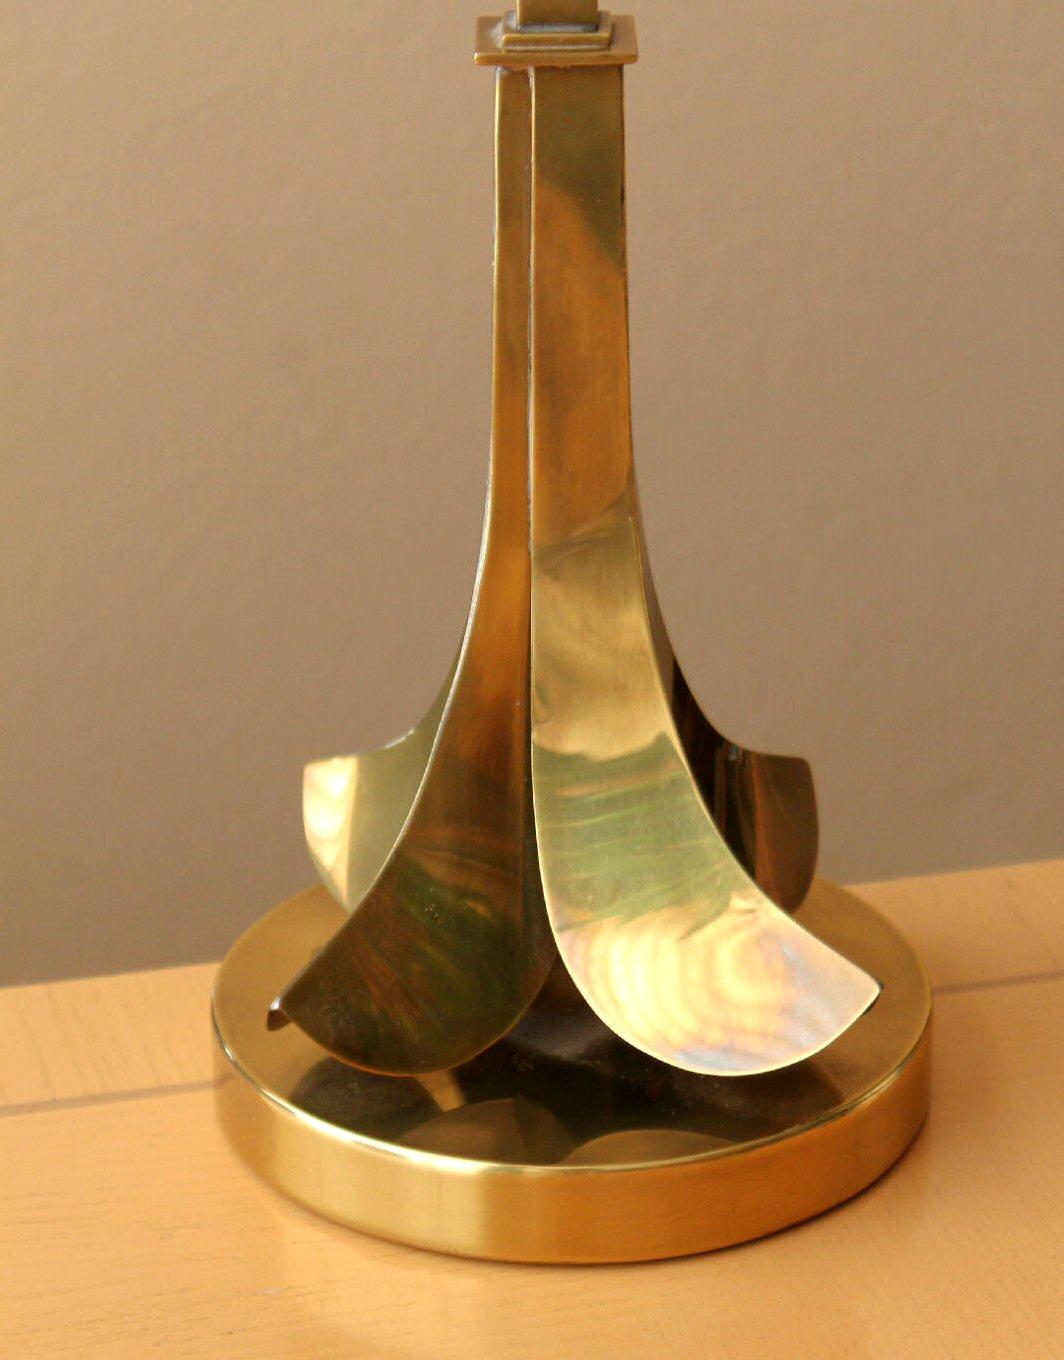 RARE CELEBRITY FURNISHING!

HART  ASSOCIATES
ABSTRACT PALM
BRASS  TABLE  LAMP

SUPERB  QUALITY!

WHITE  LINEN  SHADE

Dimensions: 30